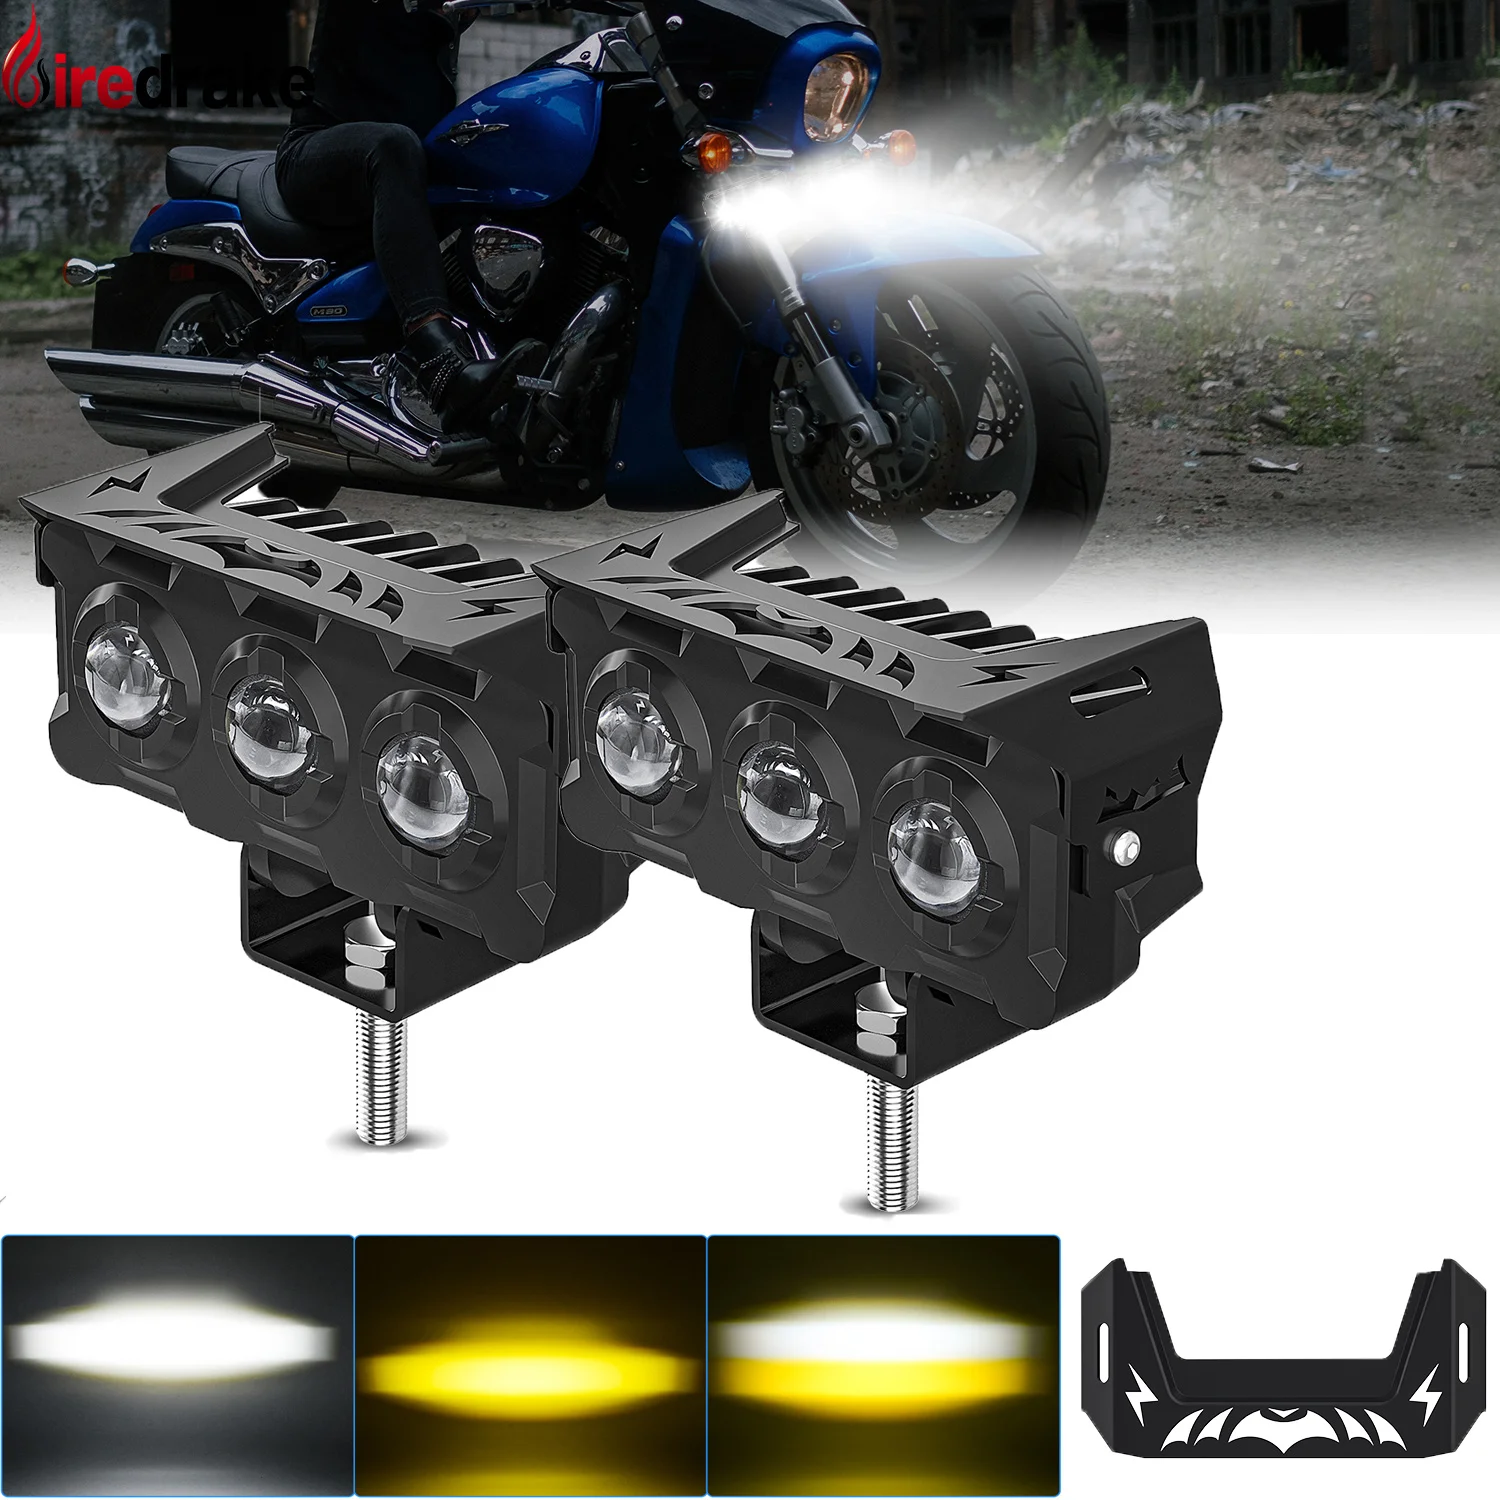 

Motorcycle Spotlights Led Headlights 180W White Yellow Super Bright Motorcycles Auxiliary Front Lights 6000K 18000LM Fog Lamps